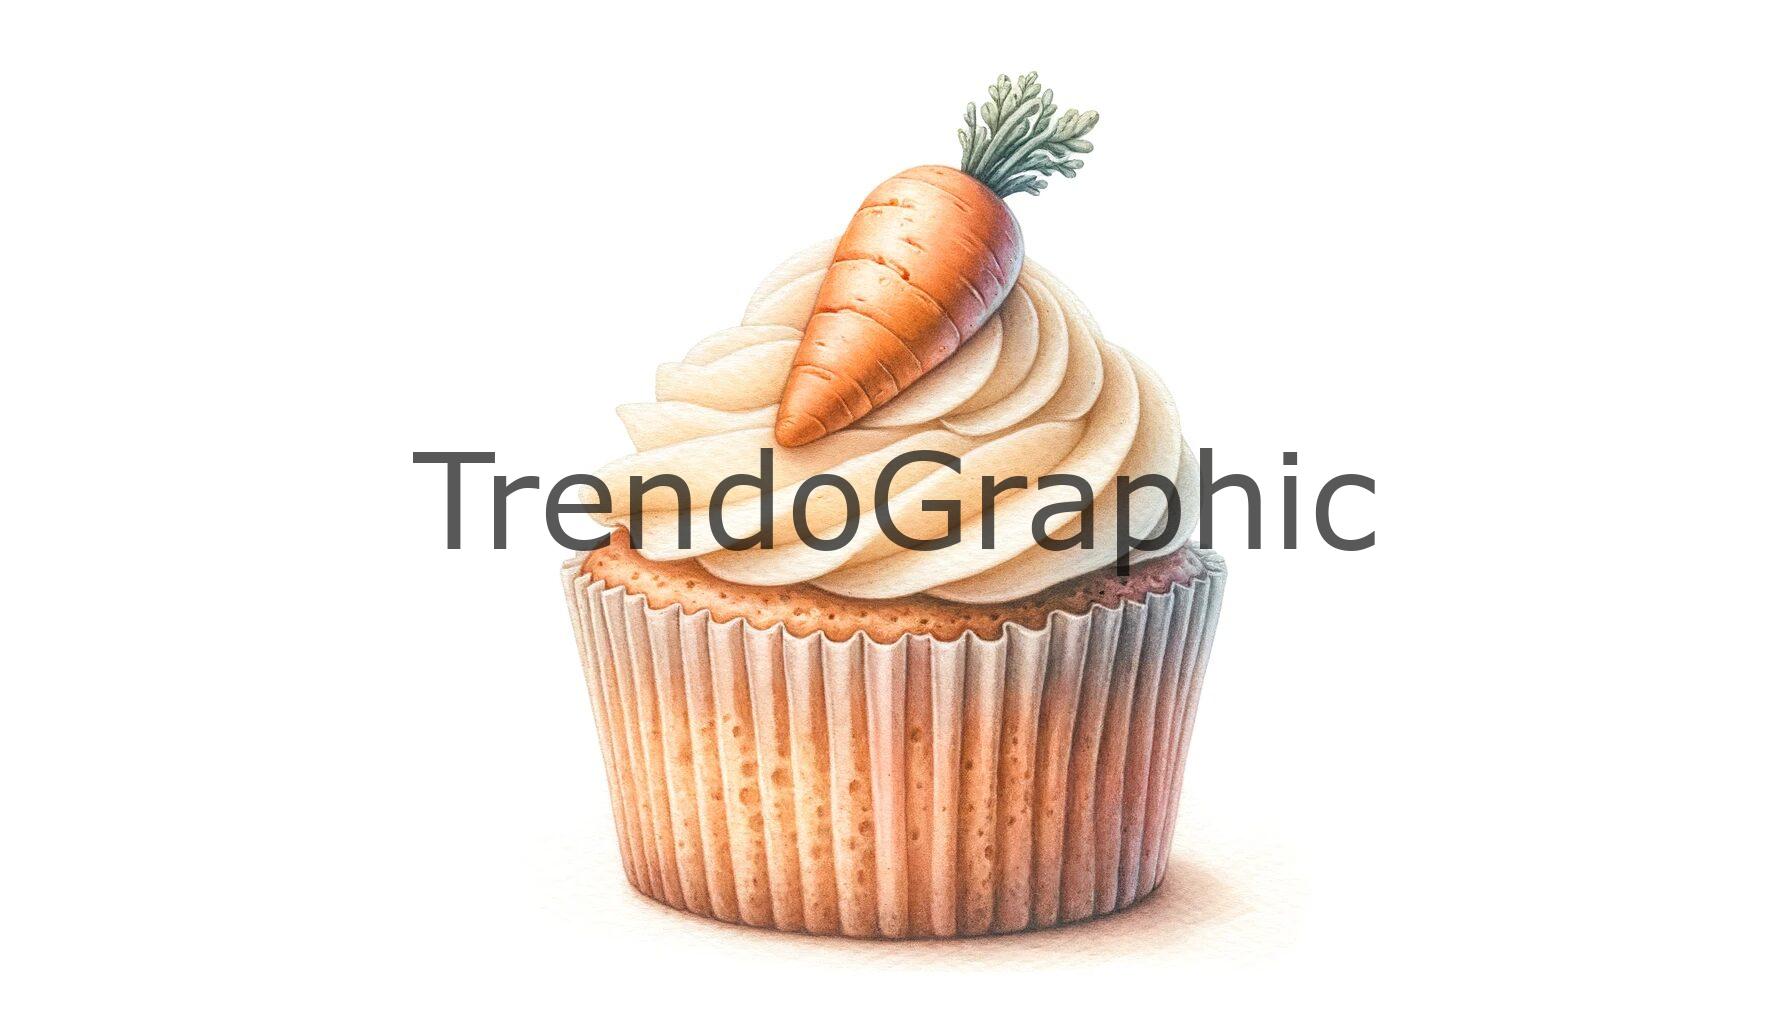 Delightful Carrot Cake Cupcake with Marzipan Carrot Topper